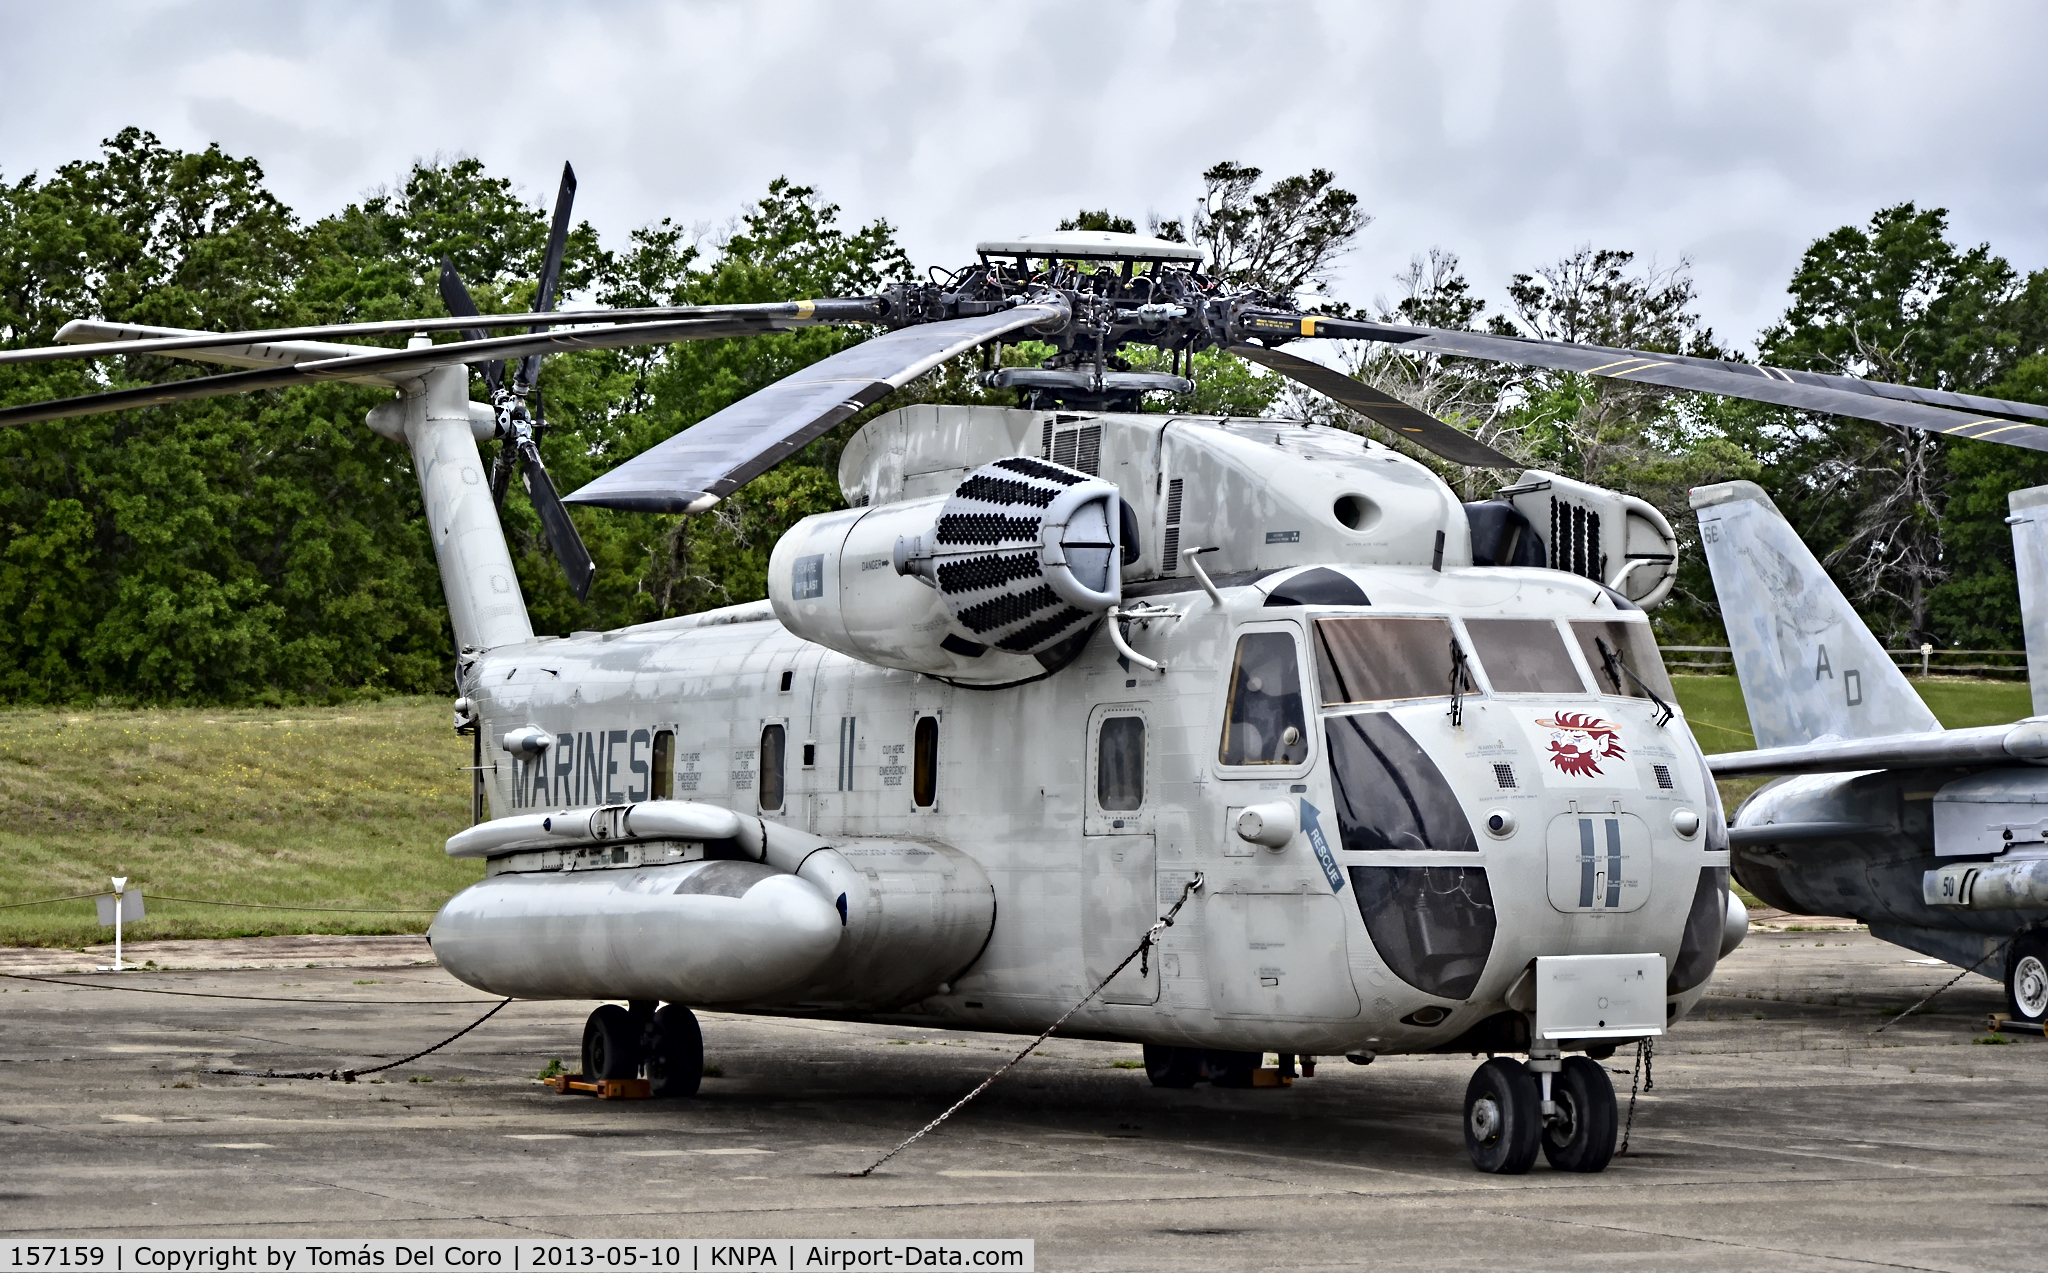 157159, Sikorsky CH-53D Sea Stallion C/N 65-284, Sikorsky CH-53E Sea Stallion BuNo 157159 C/N: 65-284

National Naval Aviation Museum
TDelCoro
May 10, 2013